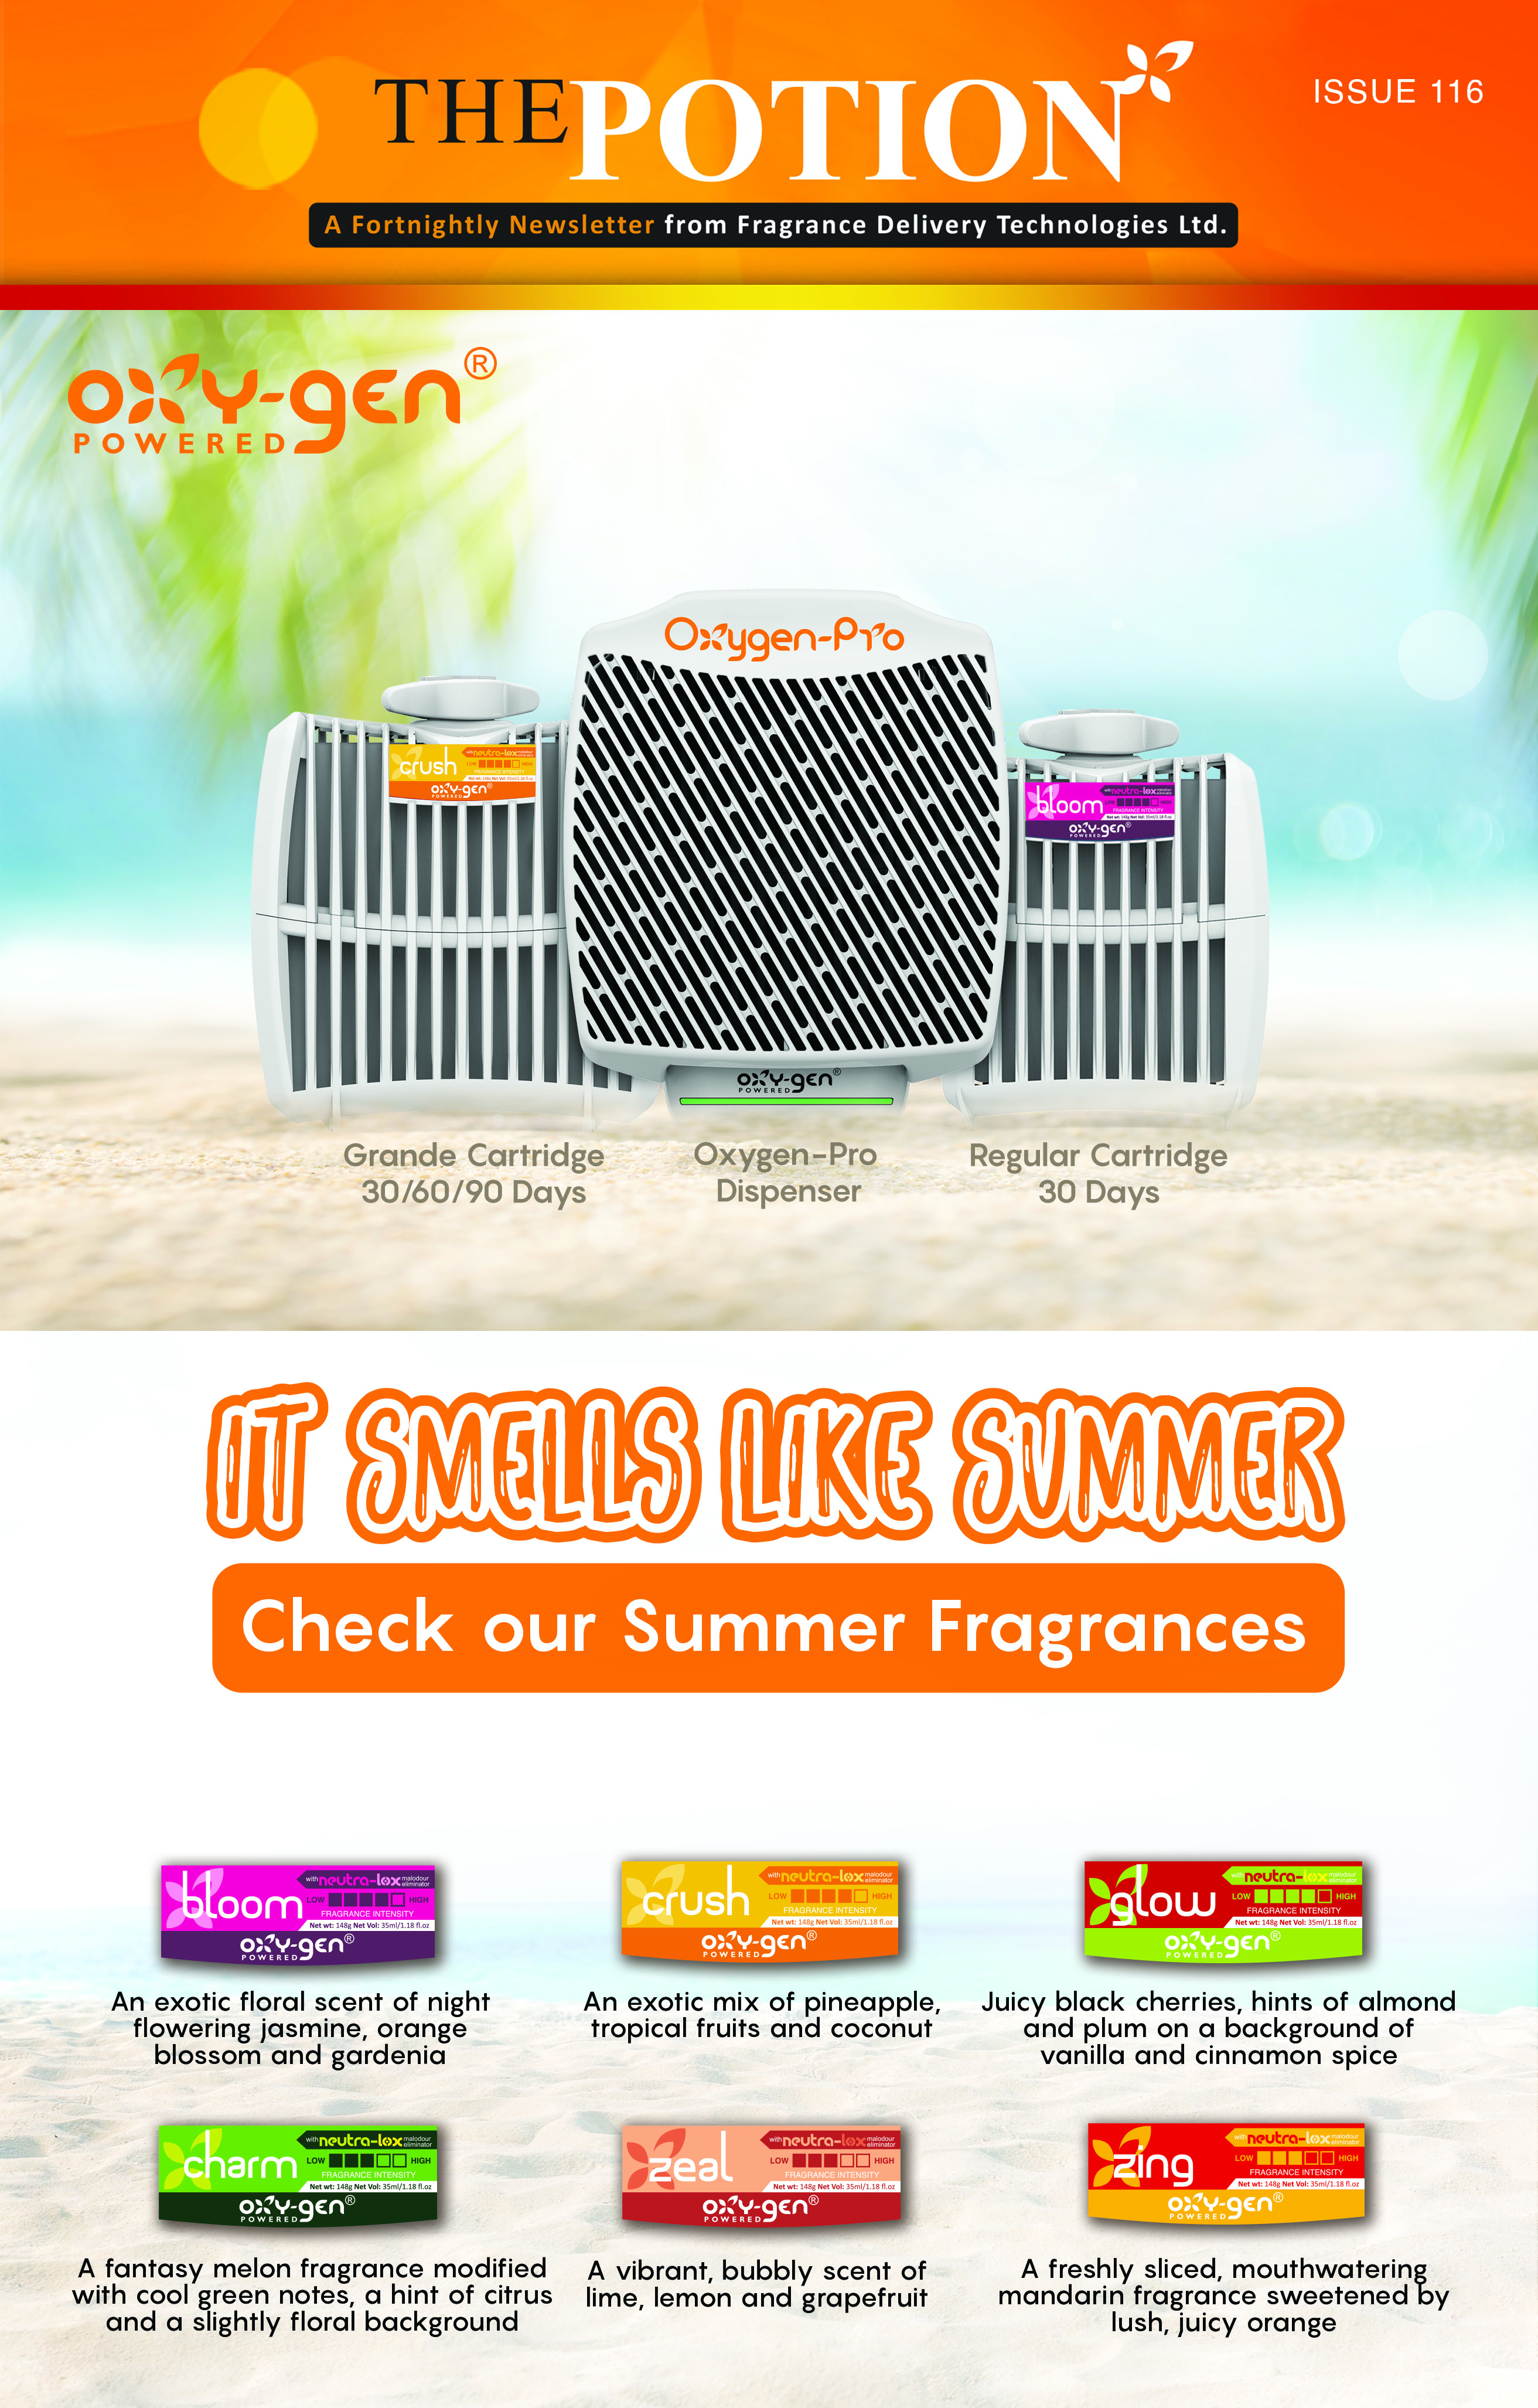 Experience Freshness, All the Time with Oxygen-Pro Summer Fragrances - The Potion Issue 116